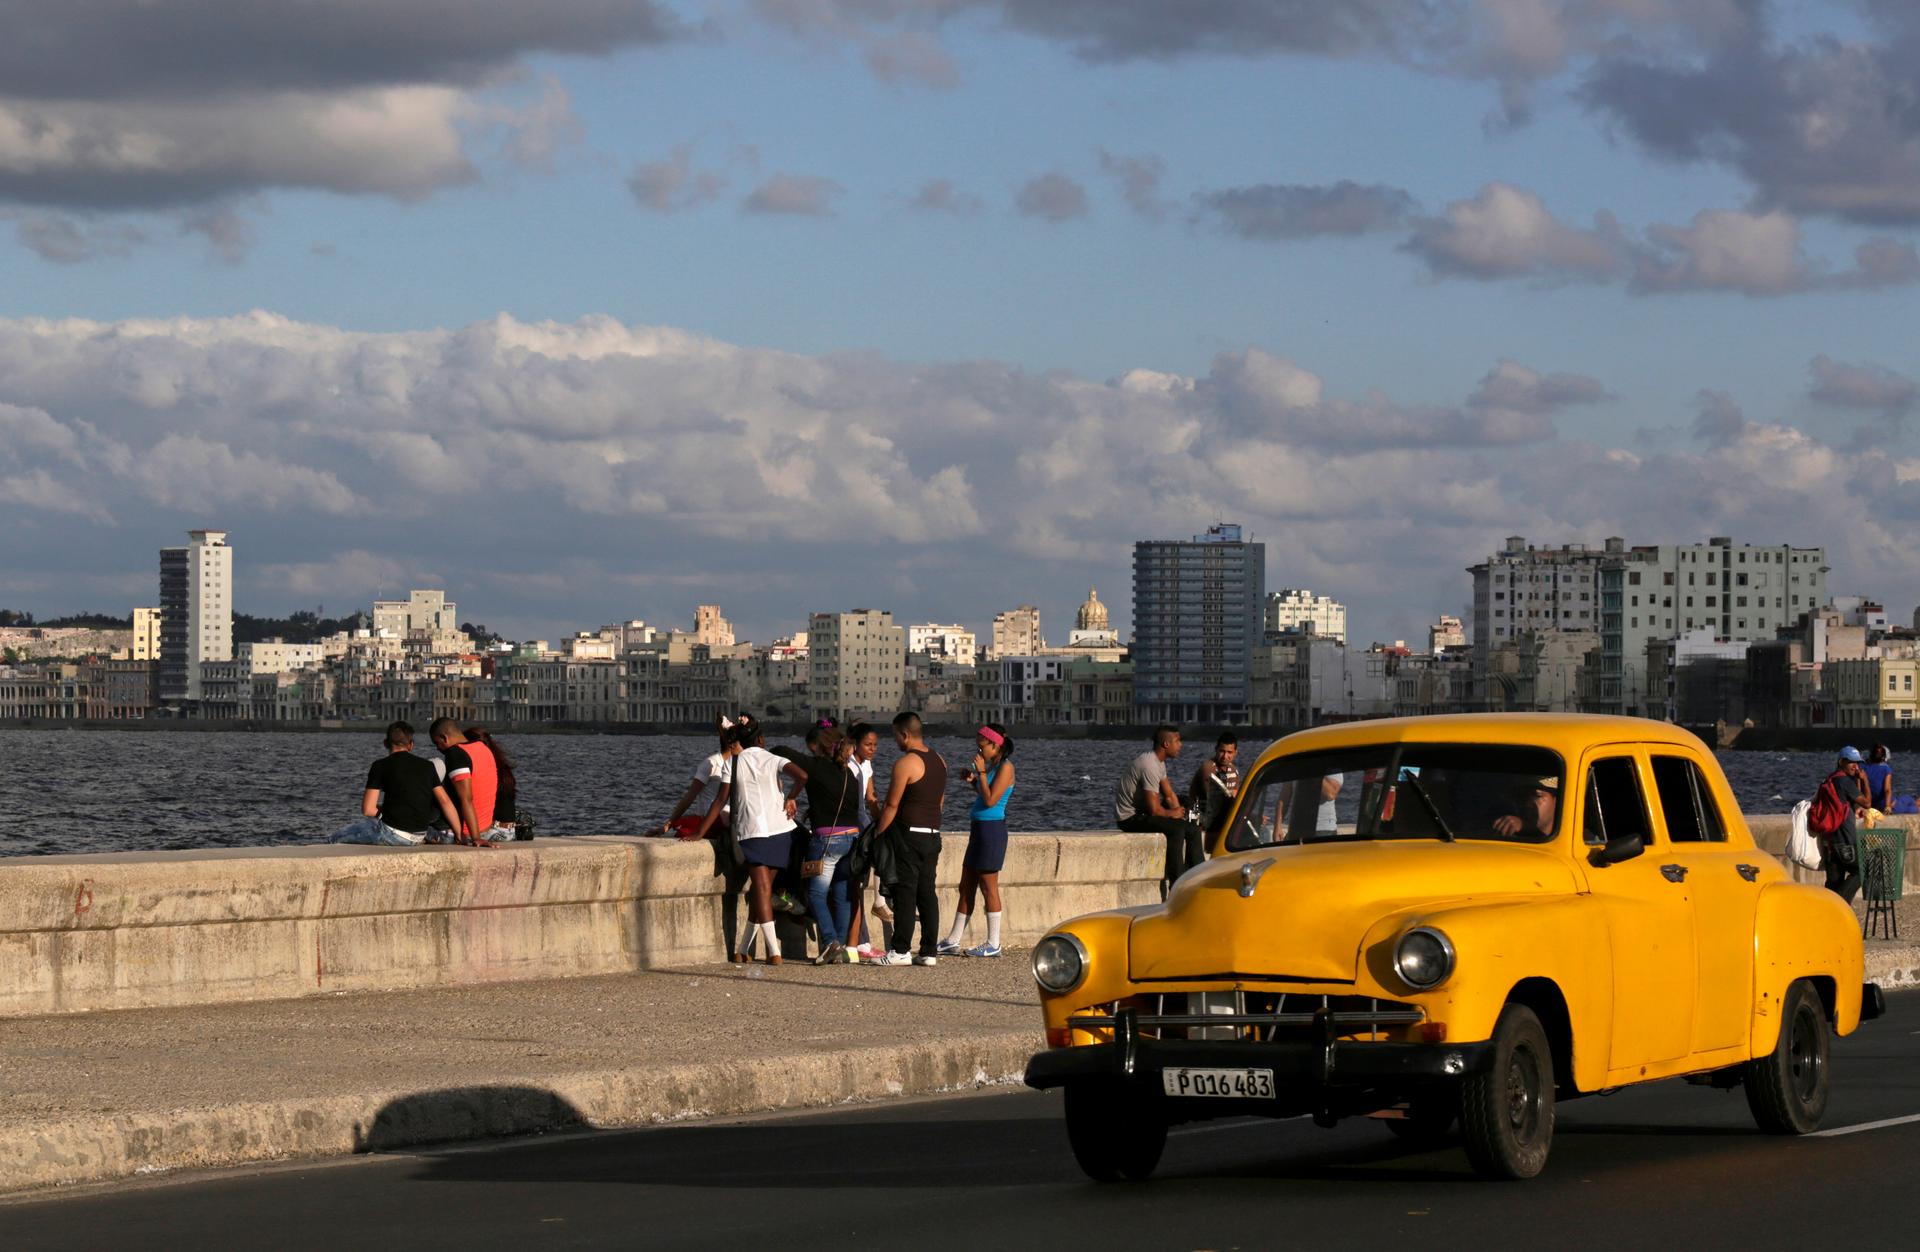 Havana Harbor has remained extremely polluted for decades as Cuba has lacked the money and technology to clean it up, but normalized relations relations with Washington could help change that.